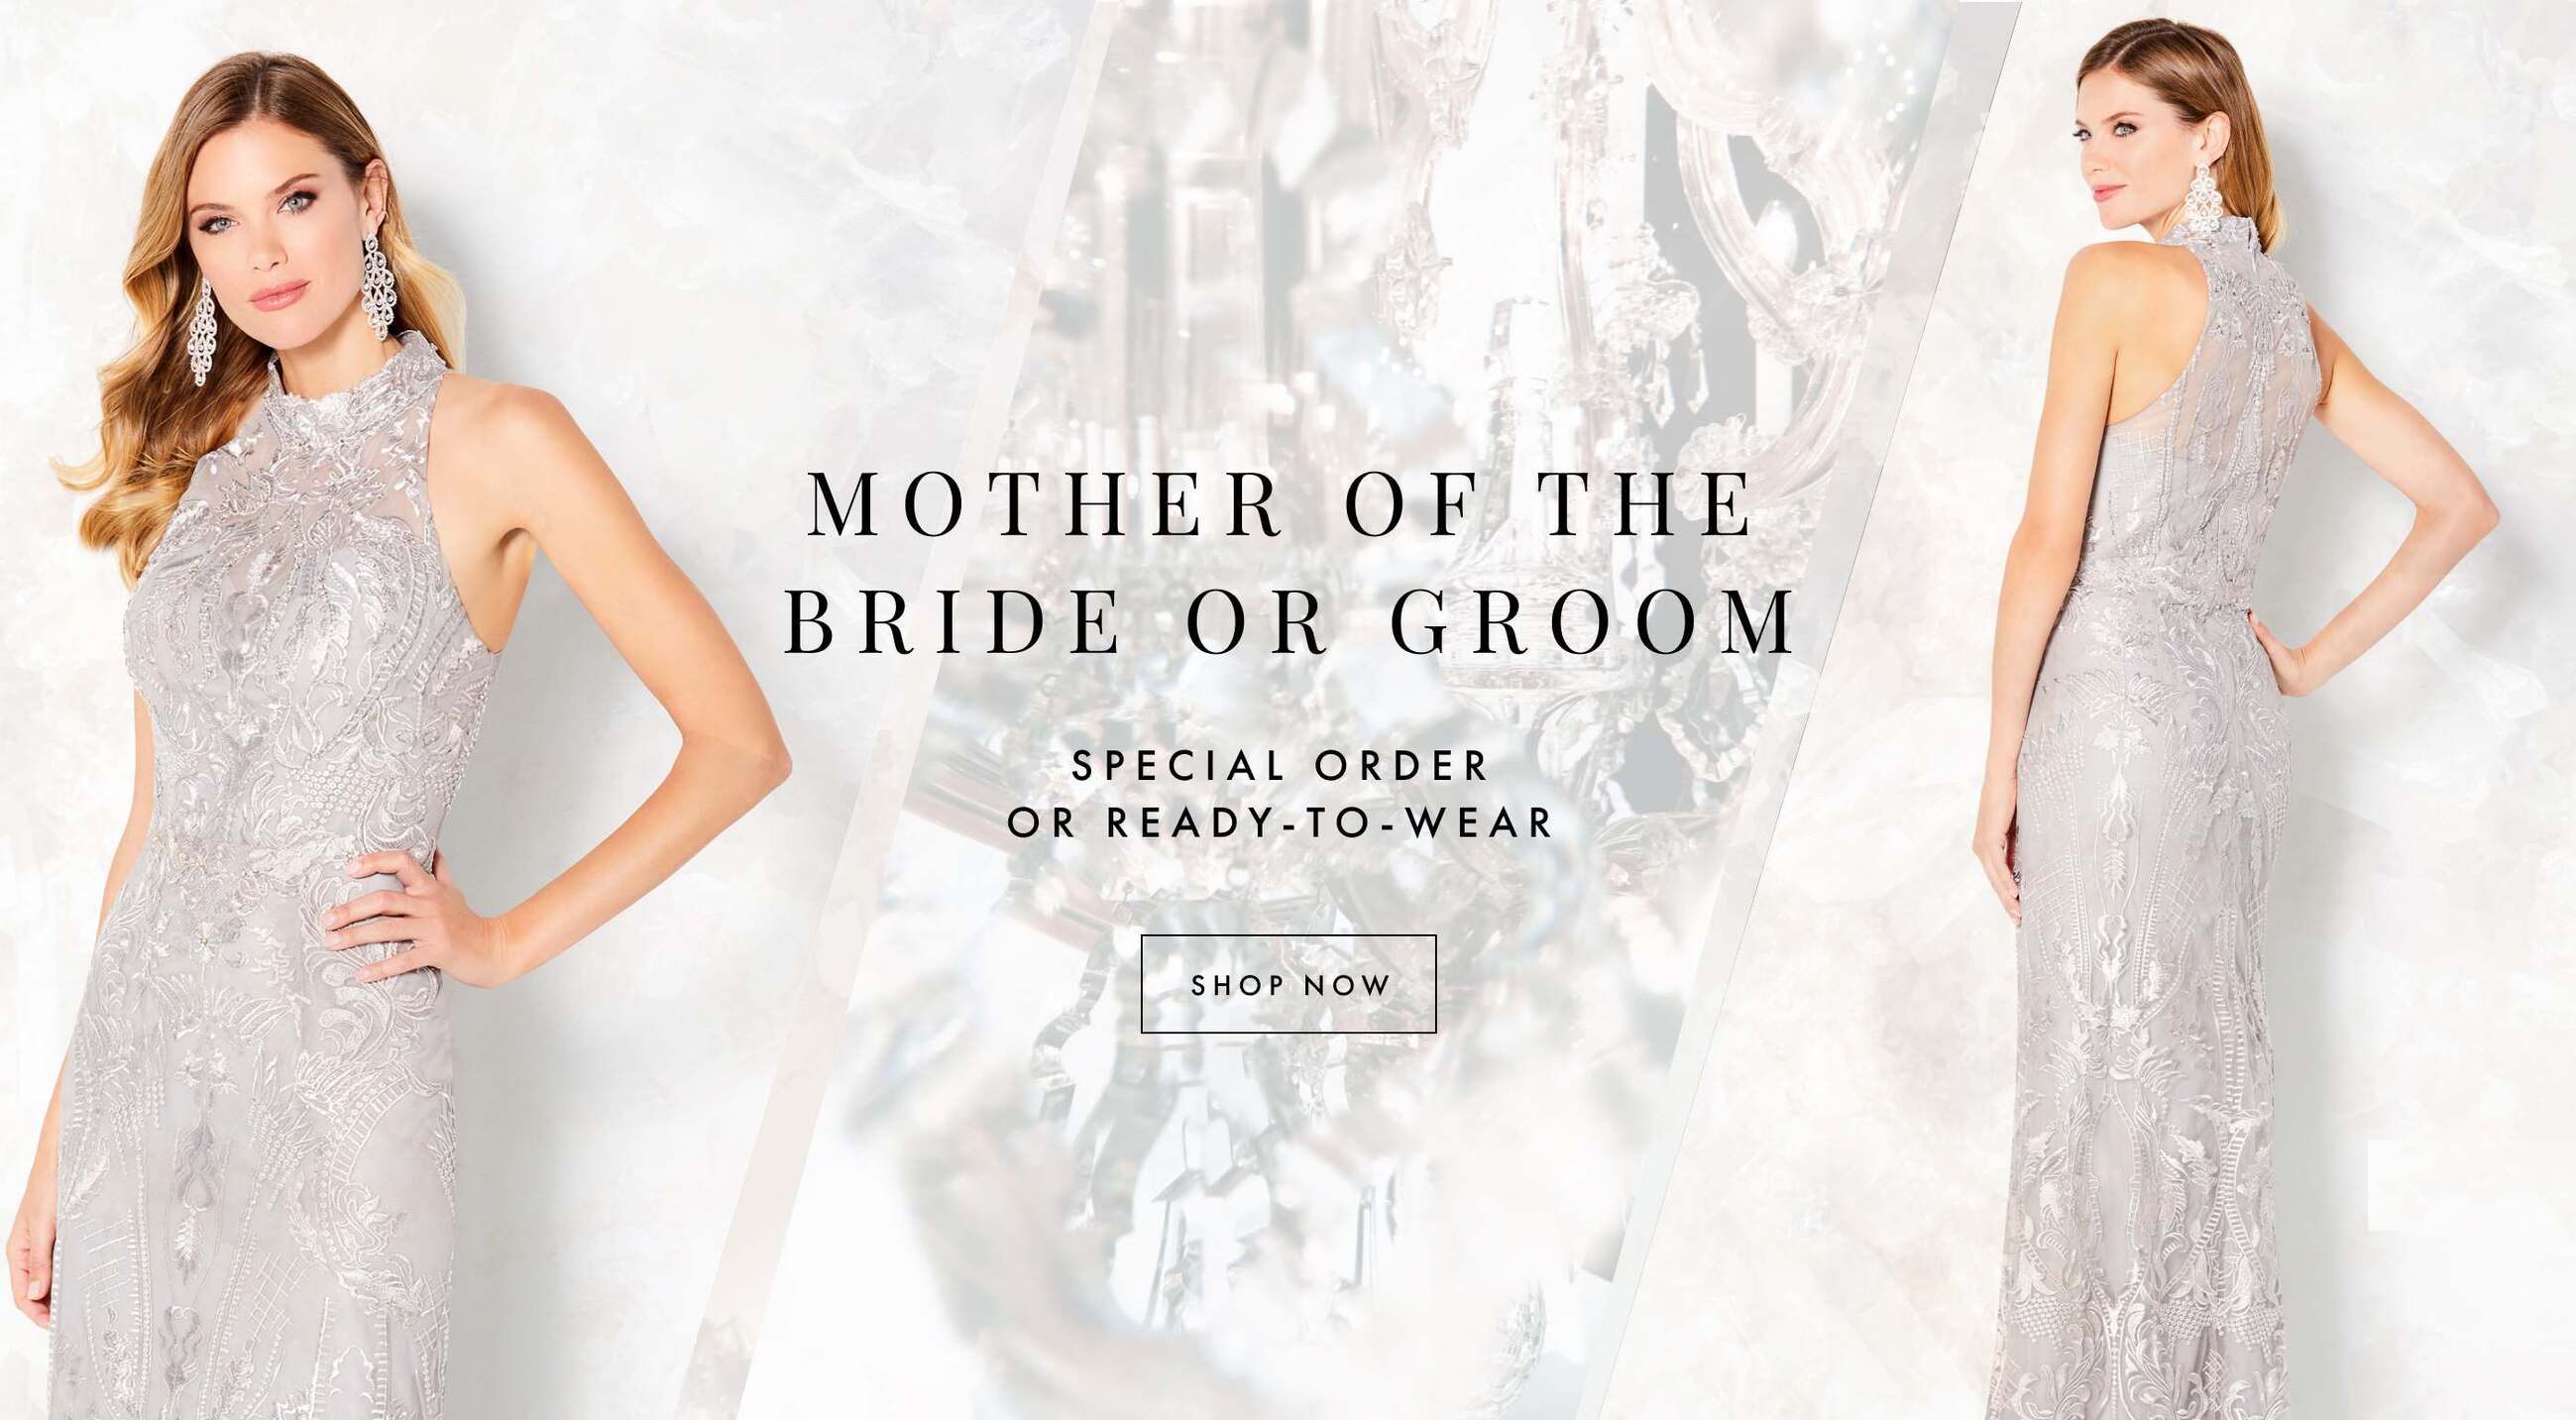 Mother Of The Bride banner